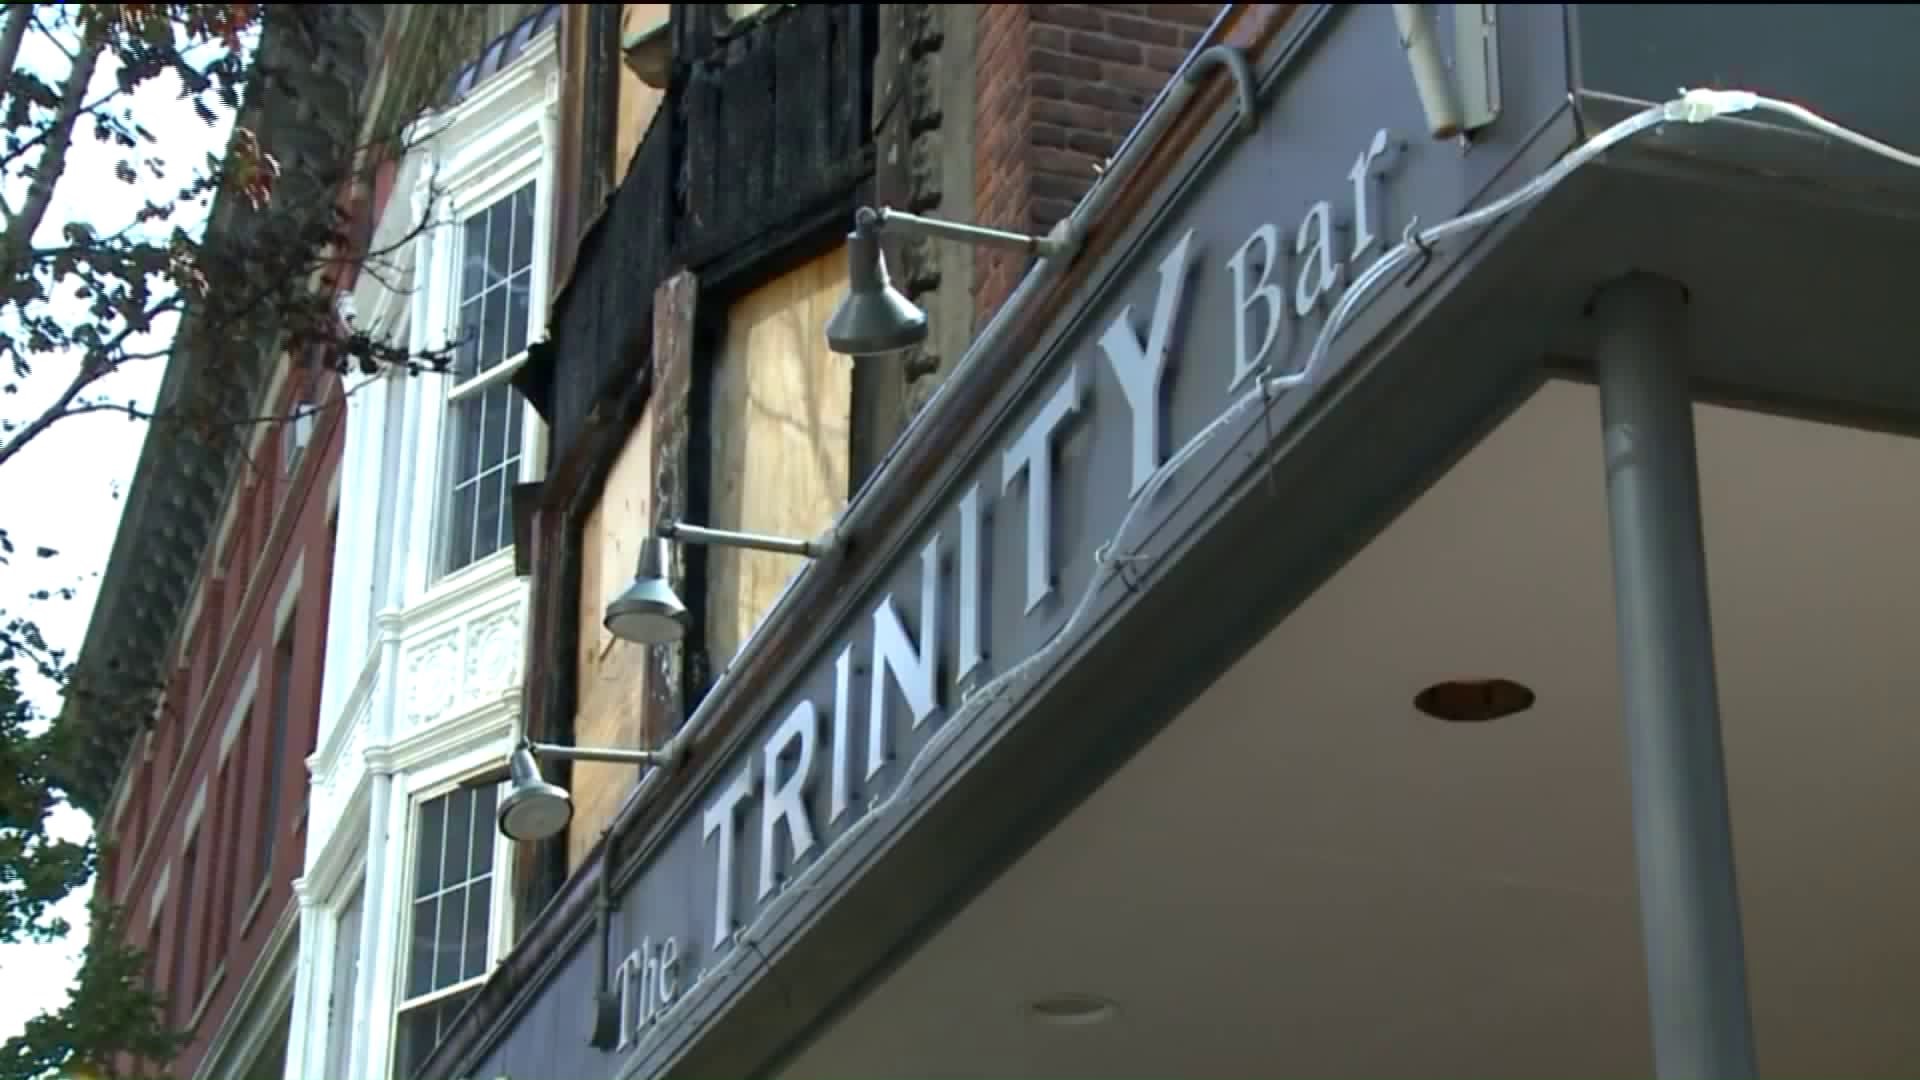 The Trinity to reopen if building deemed structurally sound